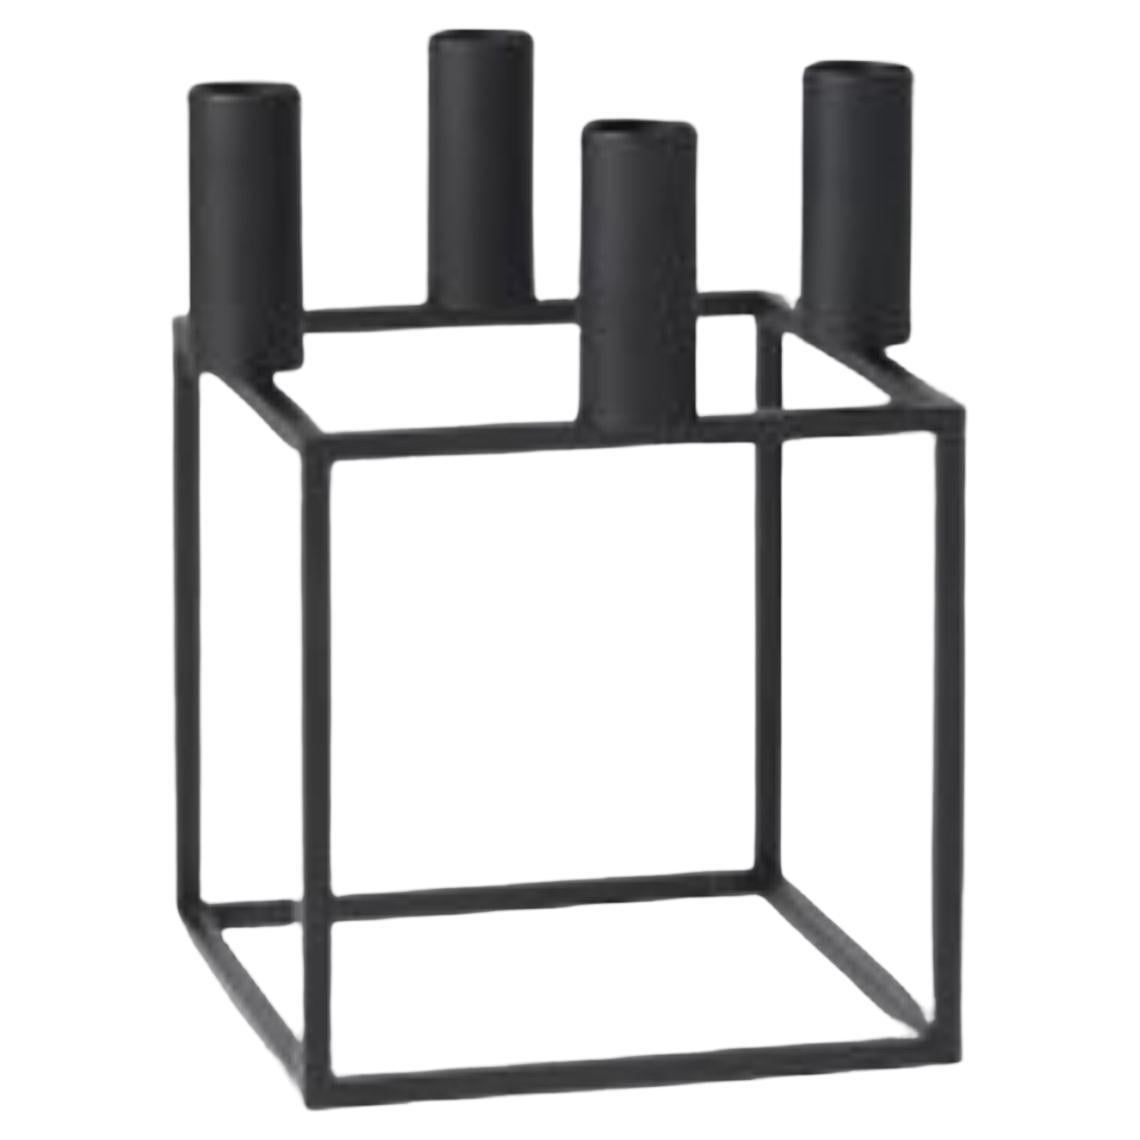 Black Kubus 4 Candle Holder by Lassen For Sale